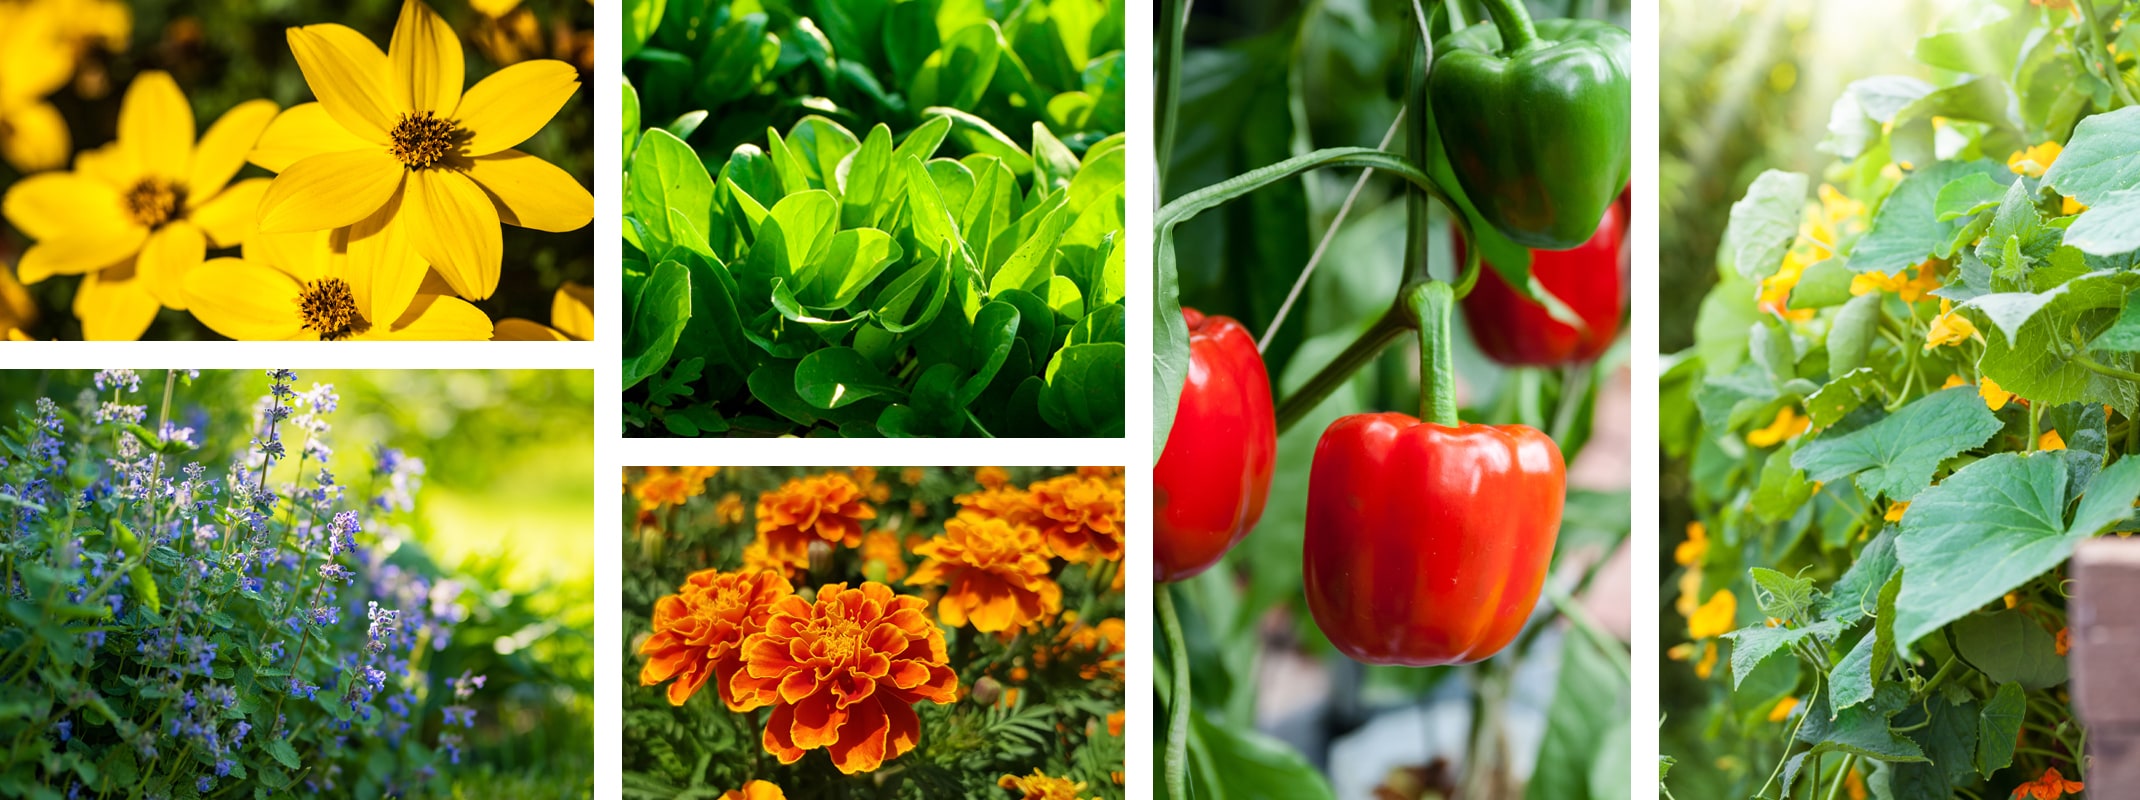 companion plants for edible gardening yellow bidens flower, catnip, marigold, spinach, peppers and cucumbers